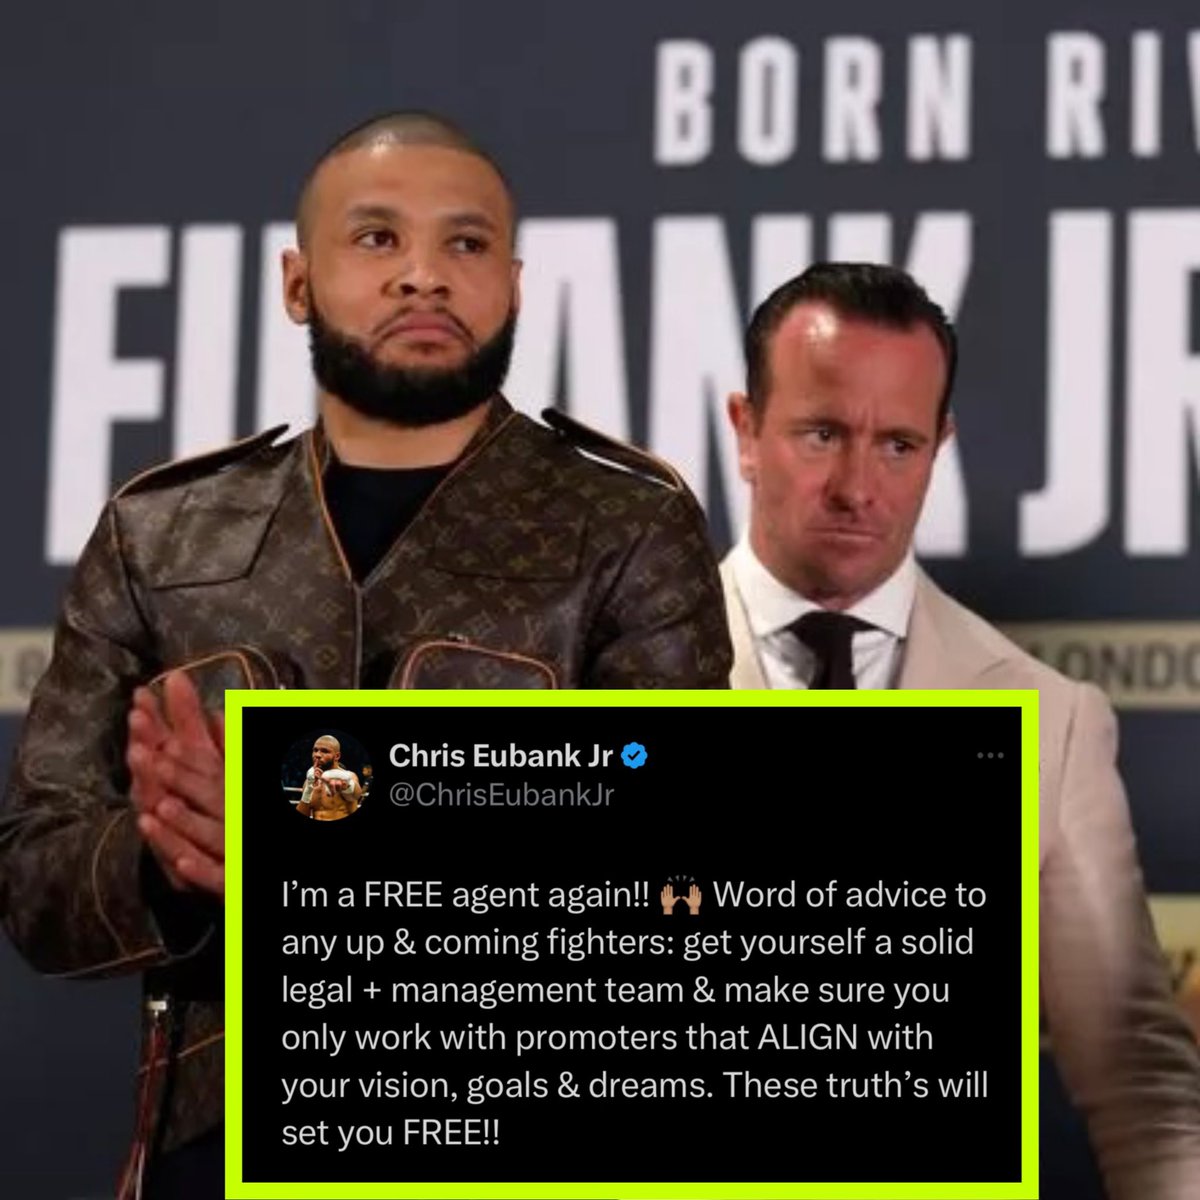 This is a damning indictment of Chris Eubank Jnr’s time with the Sauerland’s and Wasserman. 

But in fairness, he has moved on from every trainer and promoter he’s been involed with. It can’t always be someone else’s fault.